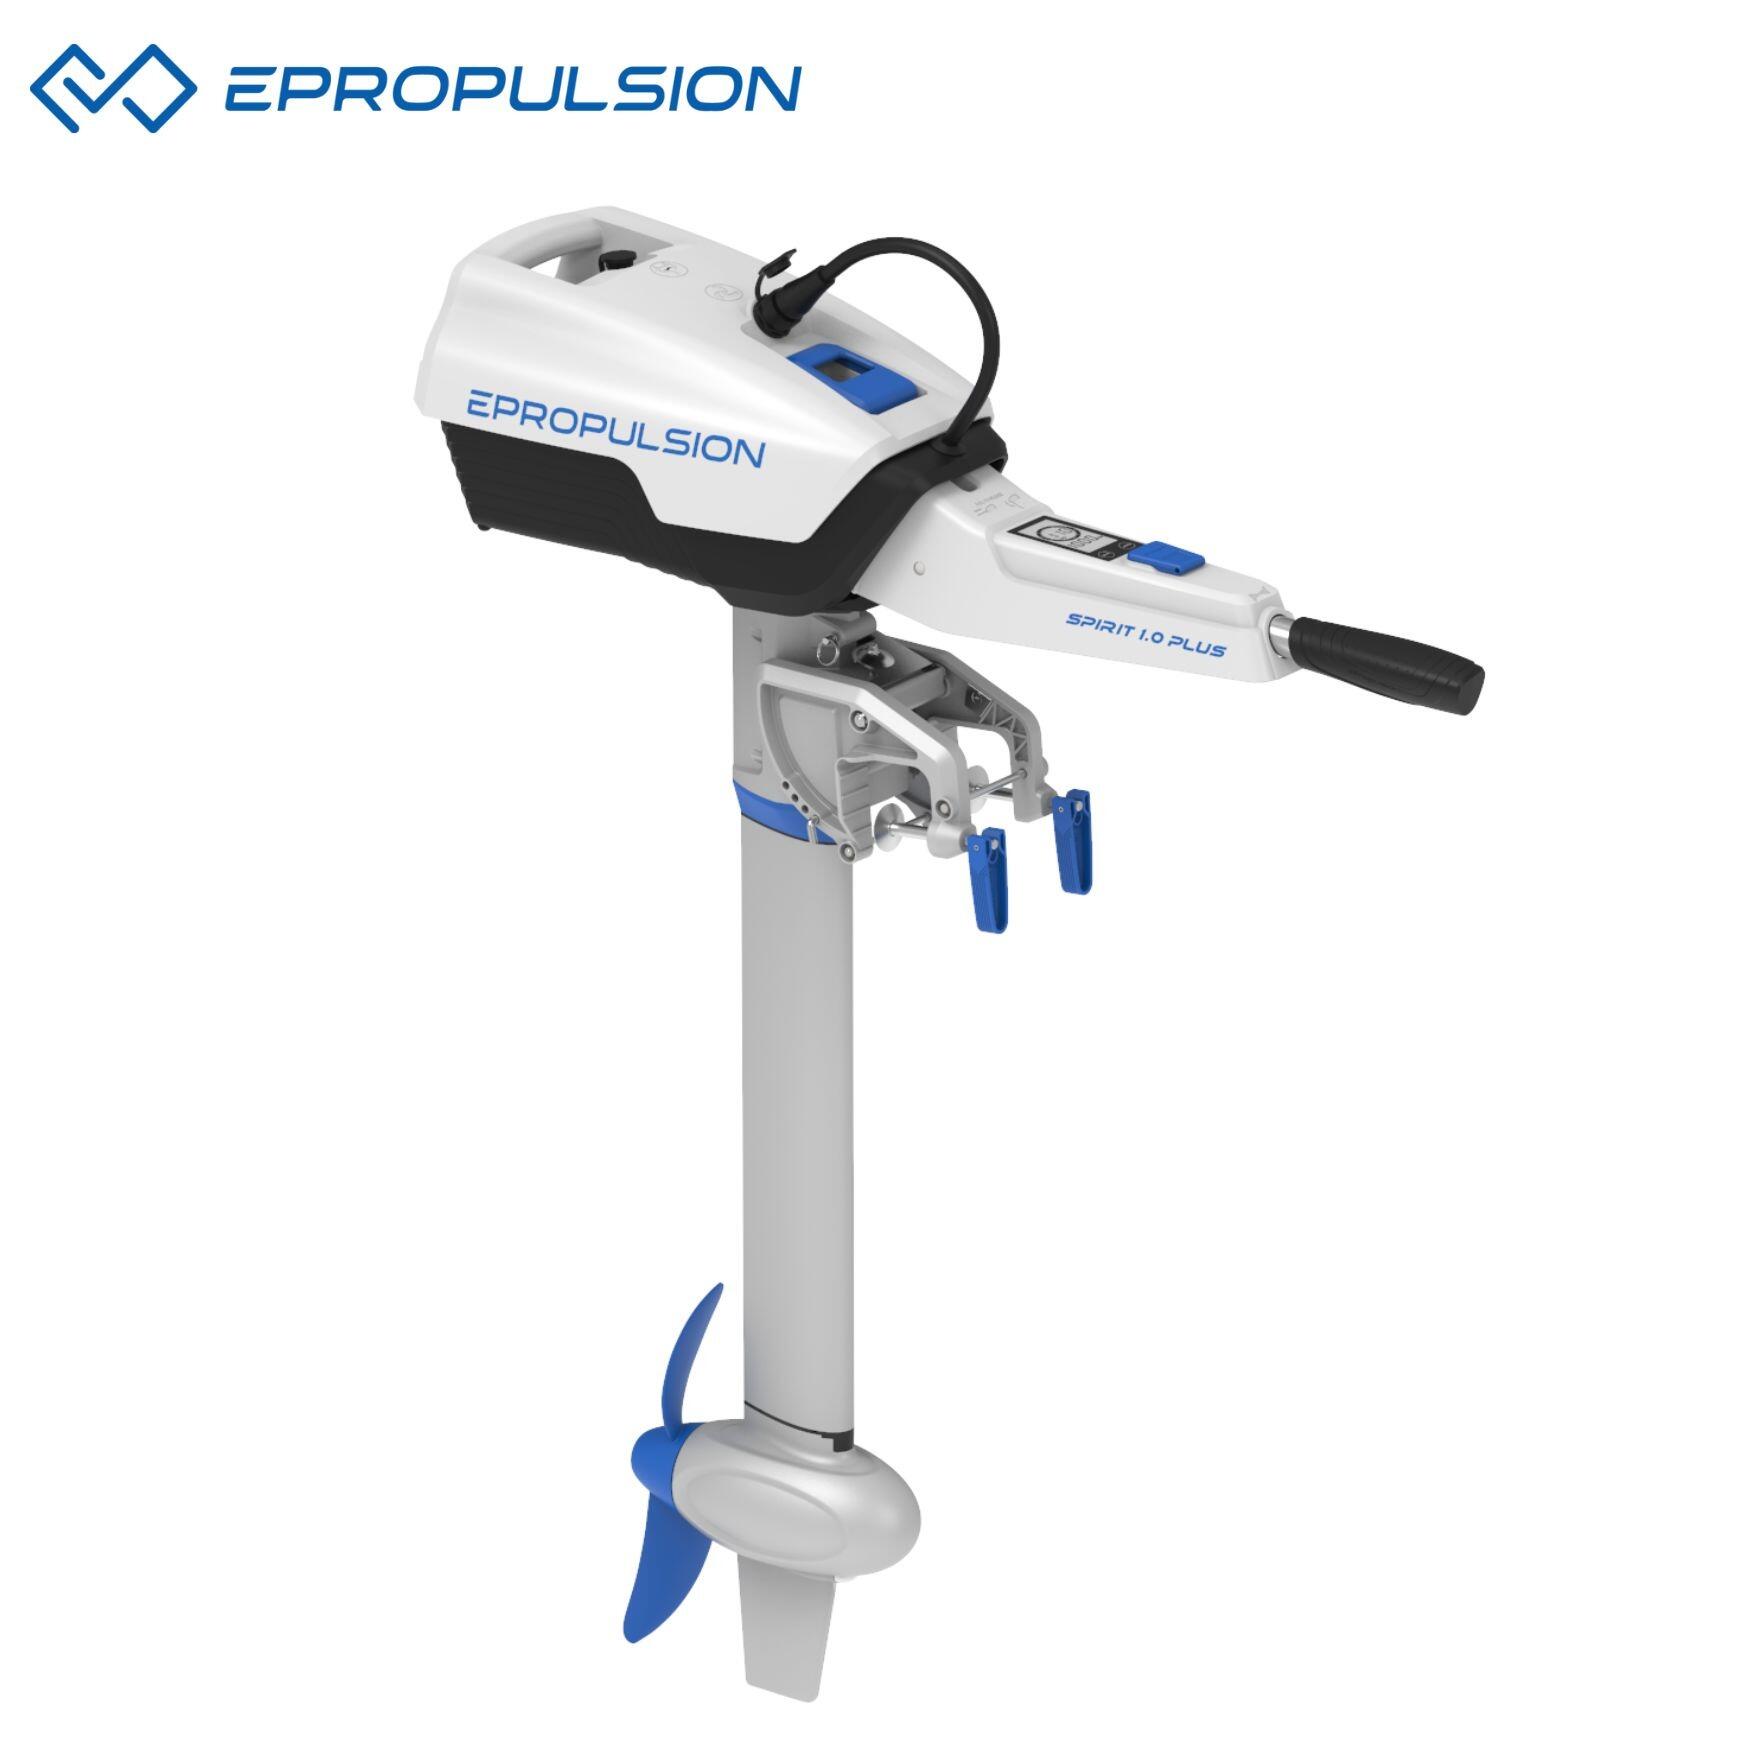 ePropulsion Spirit 1.0 Plus electric outboard pic 3